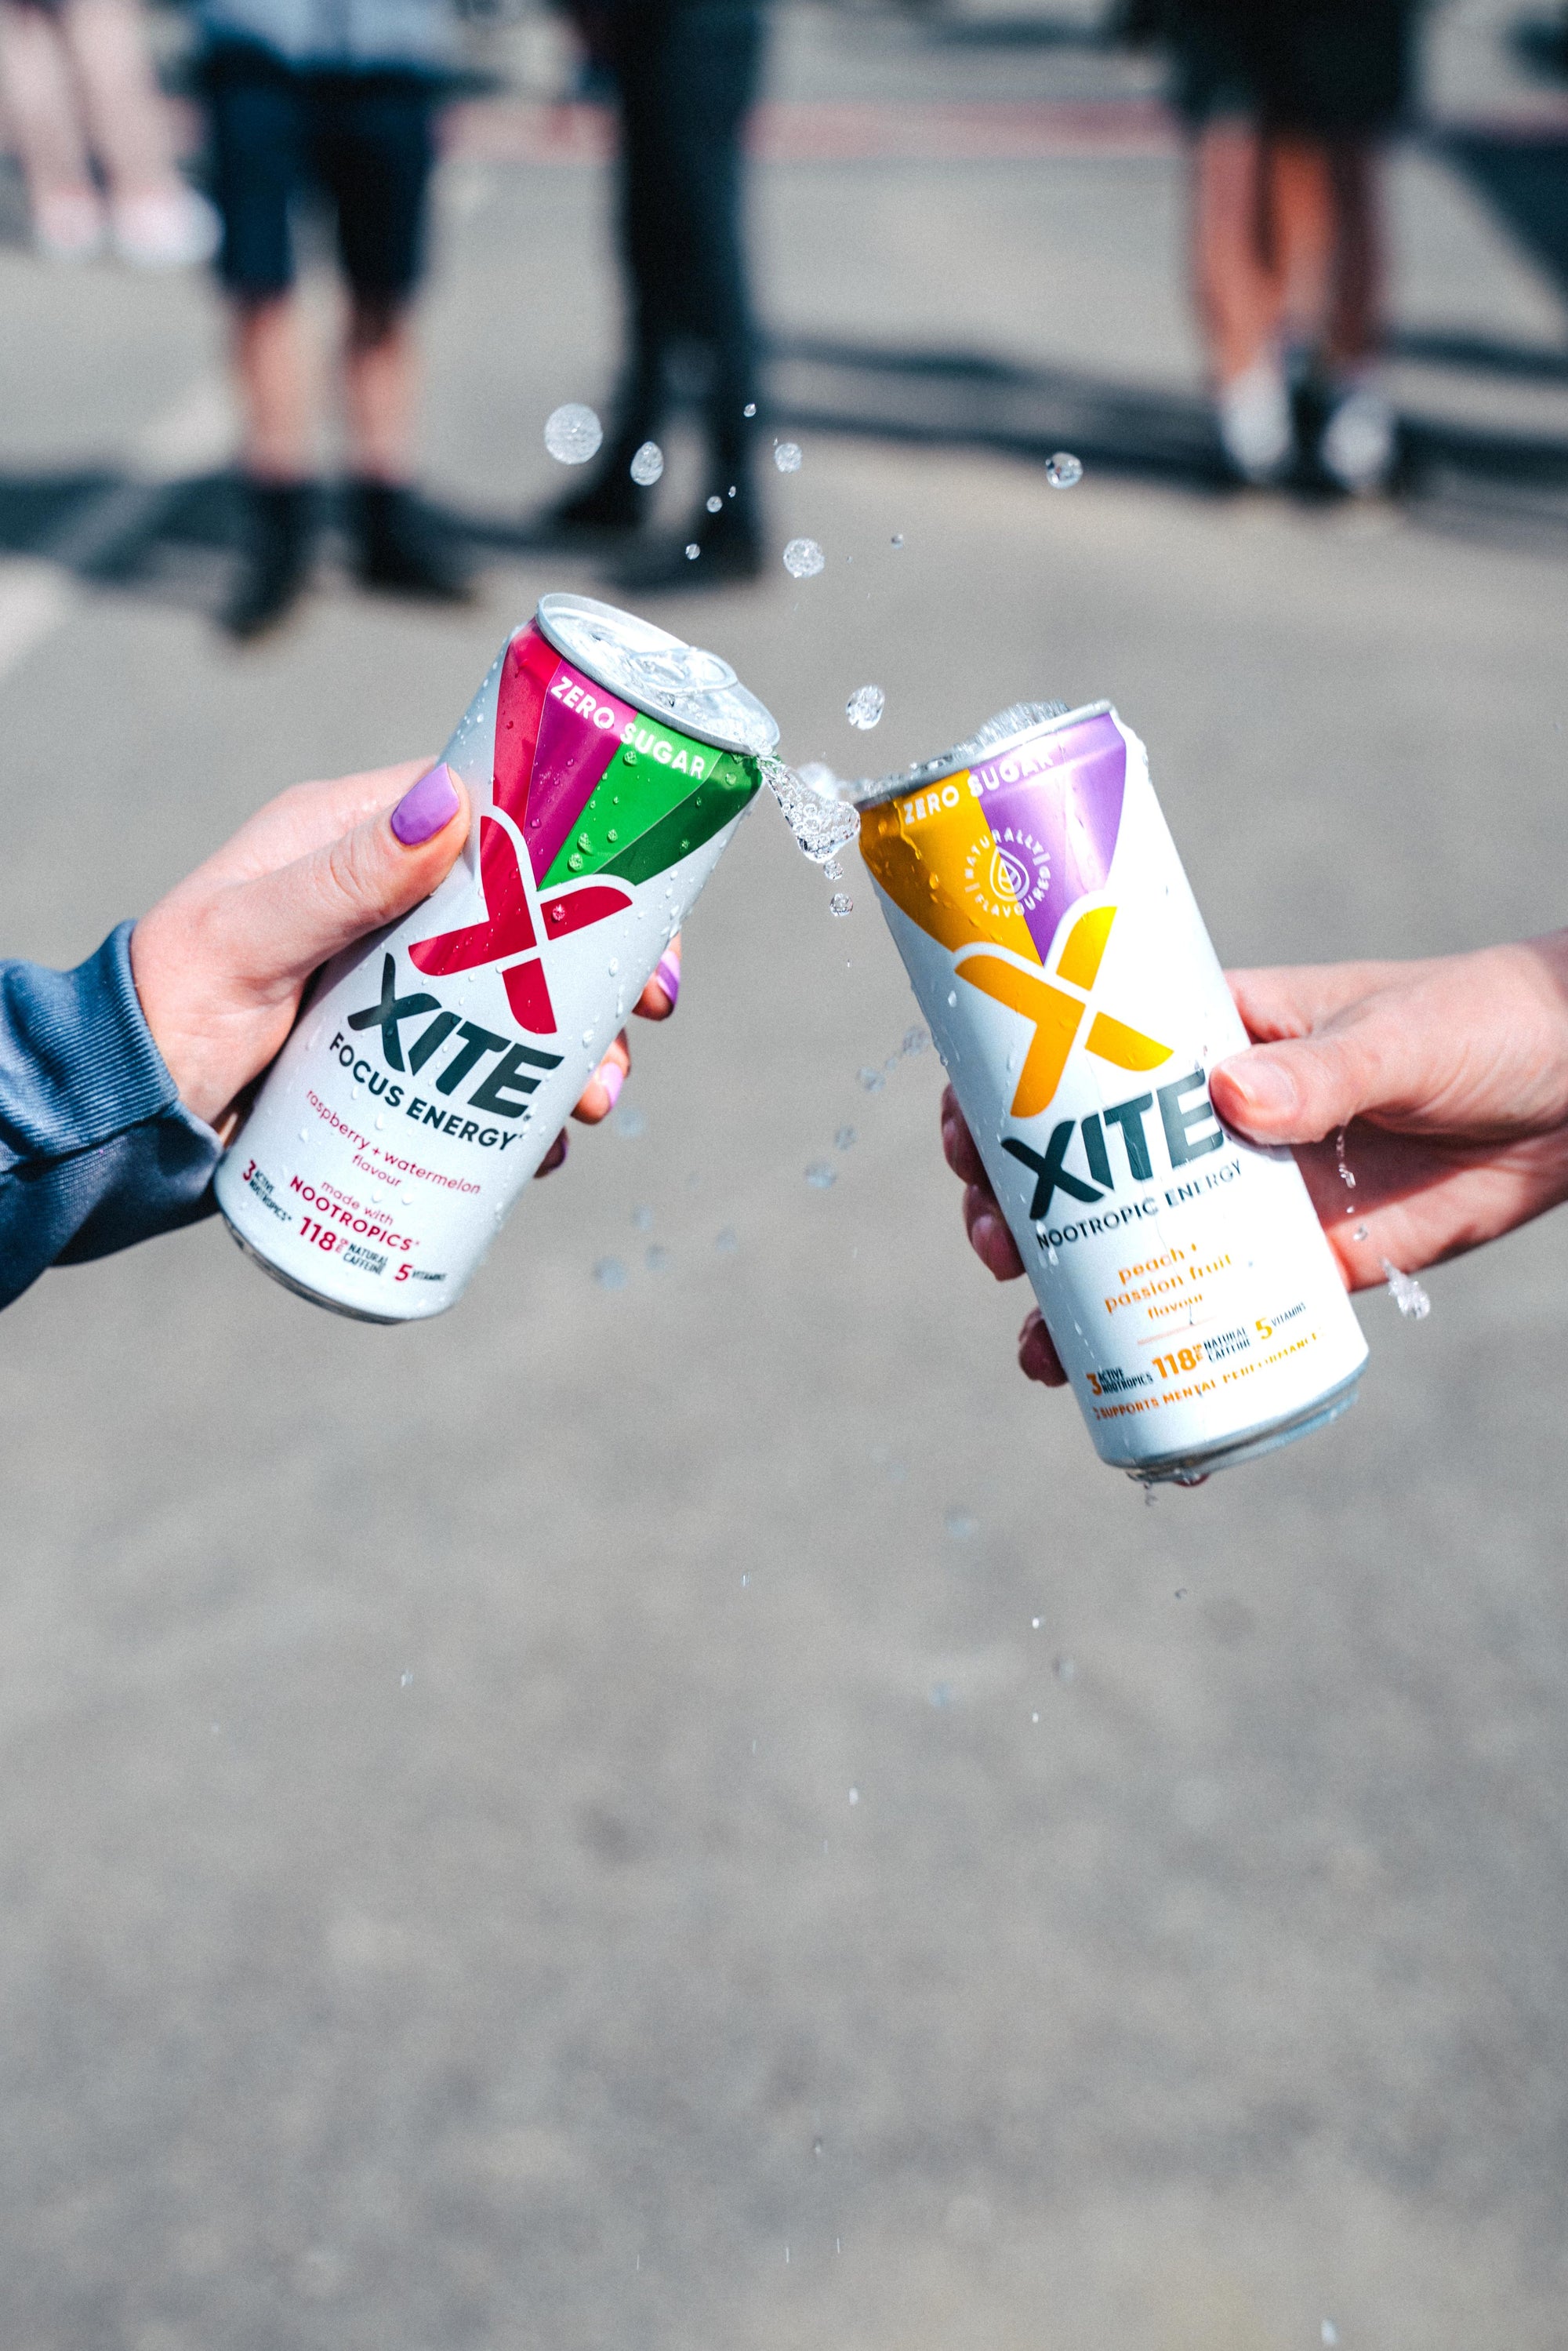 Sober and Focused: The Benefits of XITE's Nootropic Energy Drink During Dry January